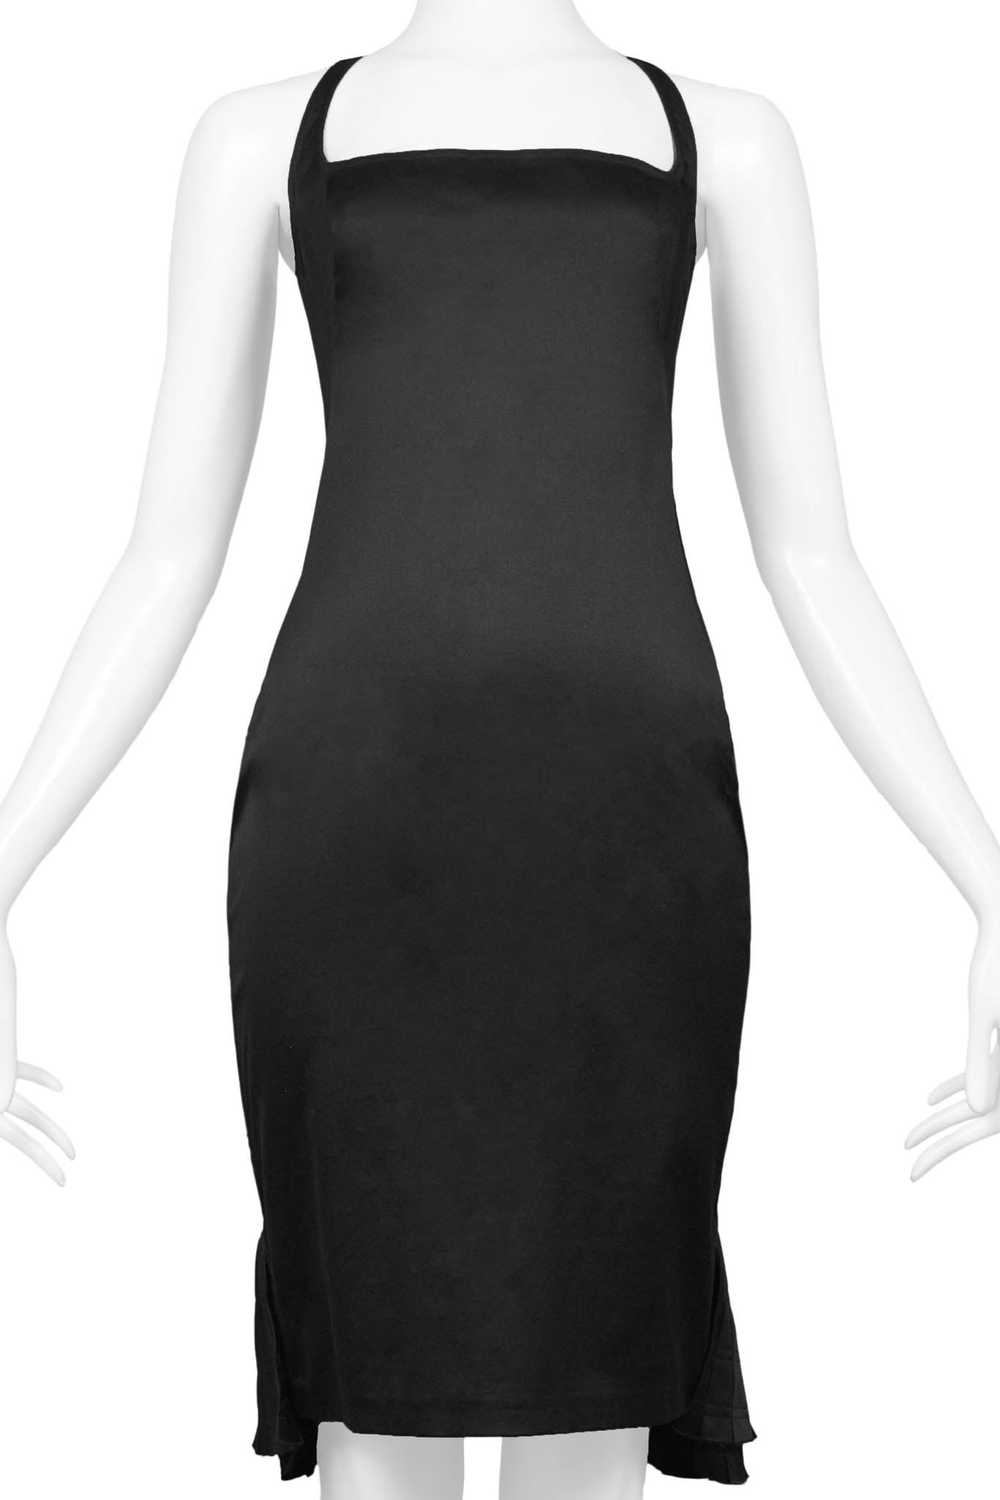 GUCCI BY TOM FORD BLACK DRESS WITH BACK PLEAT FAN… - image 3